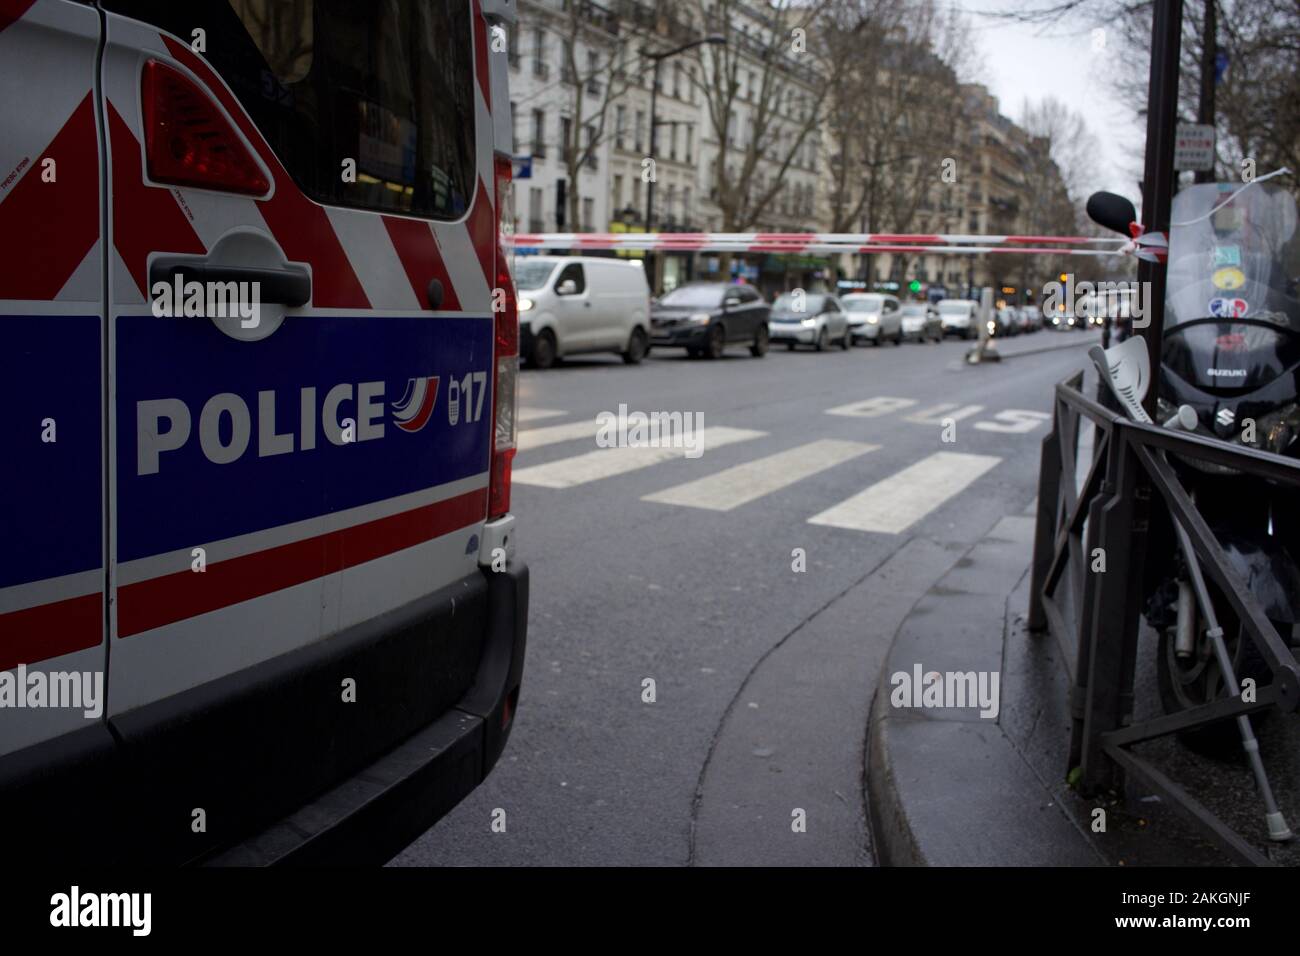 French Police Van and Cordon block road to traffic in anticipation of protests due to proposed pension reforms, travel is disrupted during strike (la grève), boulevard Barbès, 75018, Paris, France, 9th January 2020 Stock Photo